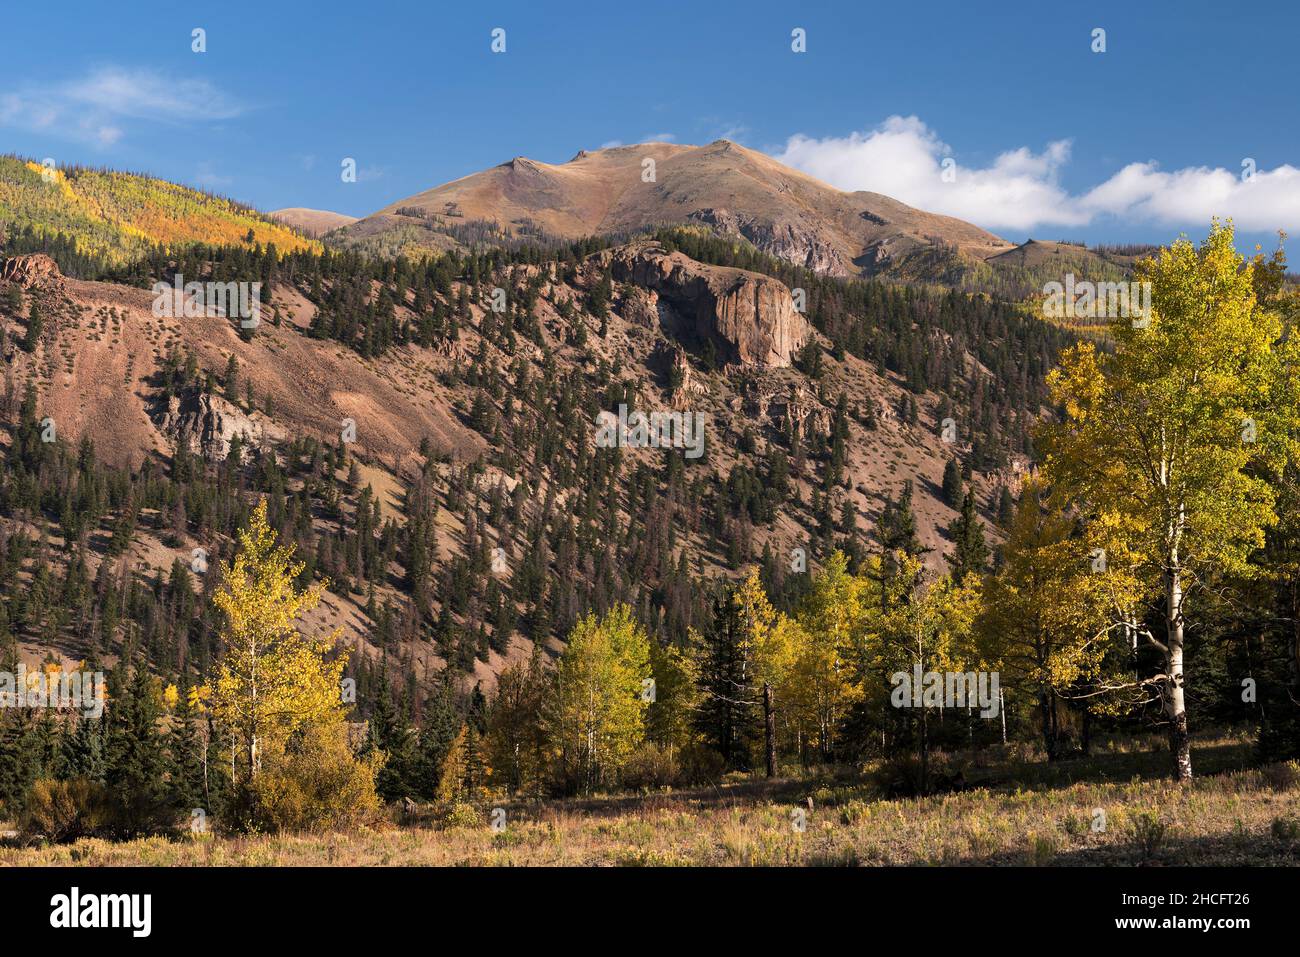 Grassy Mountain is 12,772 feet and is part of the rugged San Juan mountain range in South Western Colorado. Stock Photo